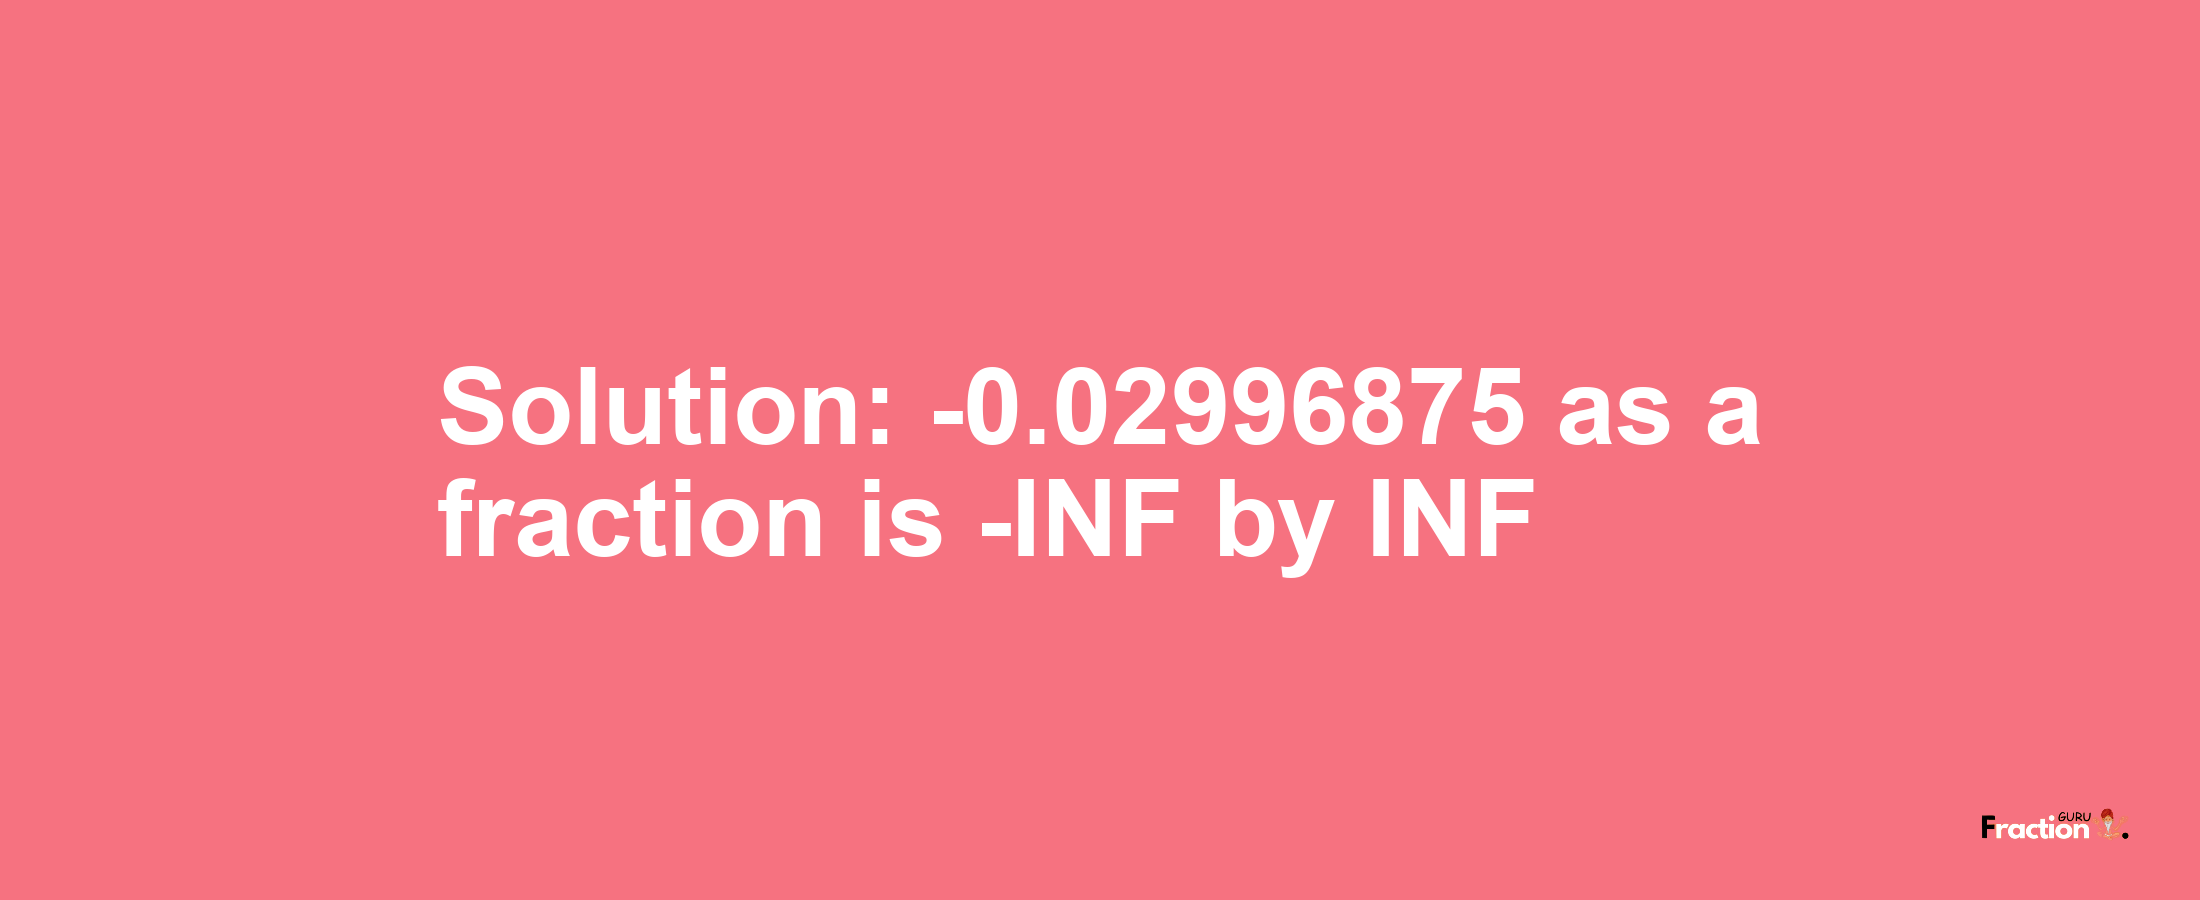 Solution:-0.02996875 as a fraction is -INF/INF